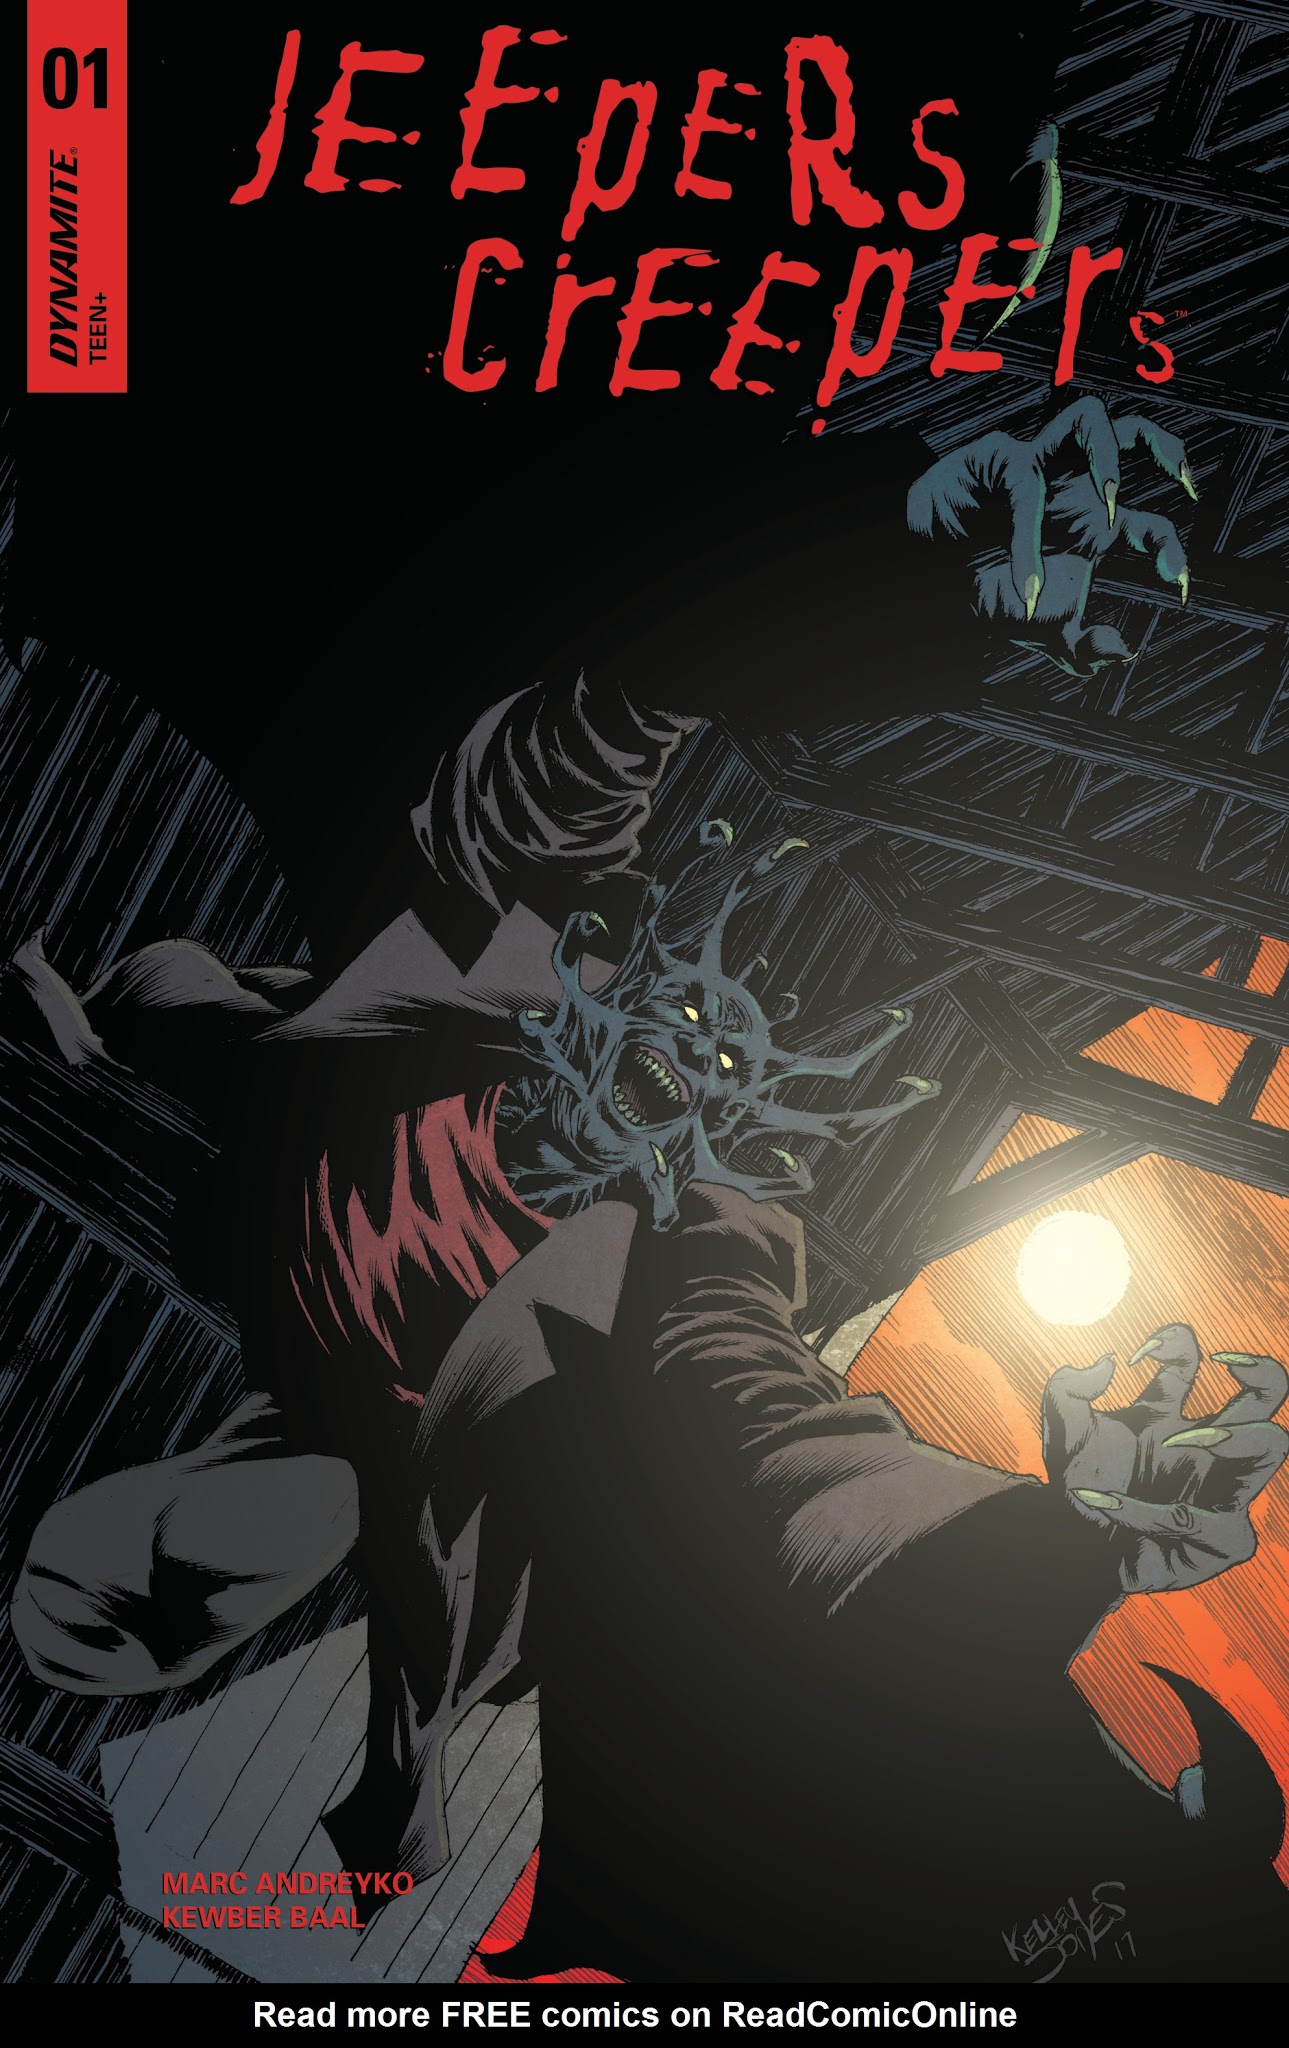 Read online Jeepers Creepers comic -  Issue #1 - 1